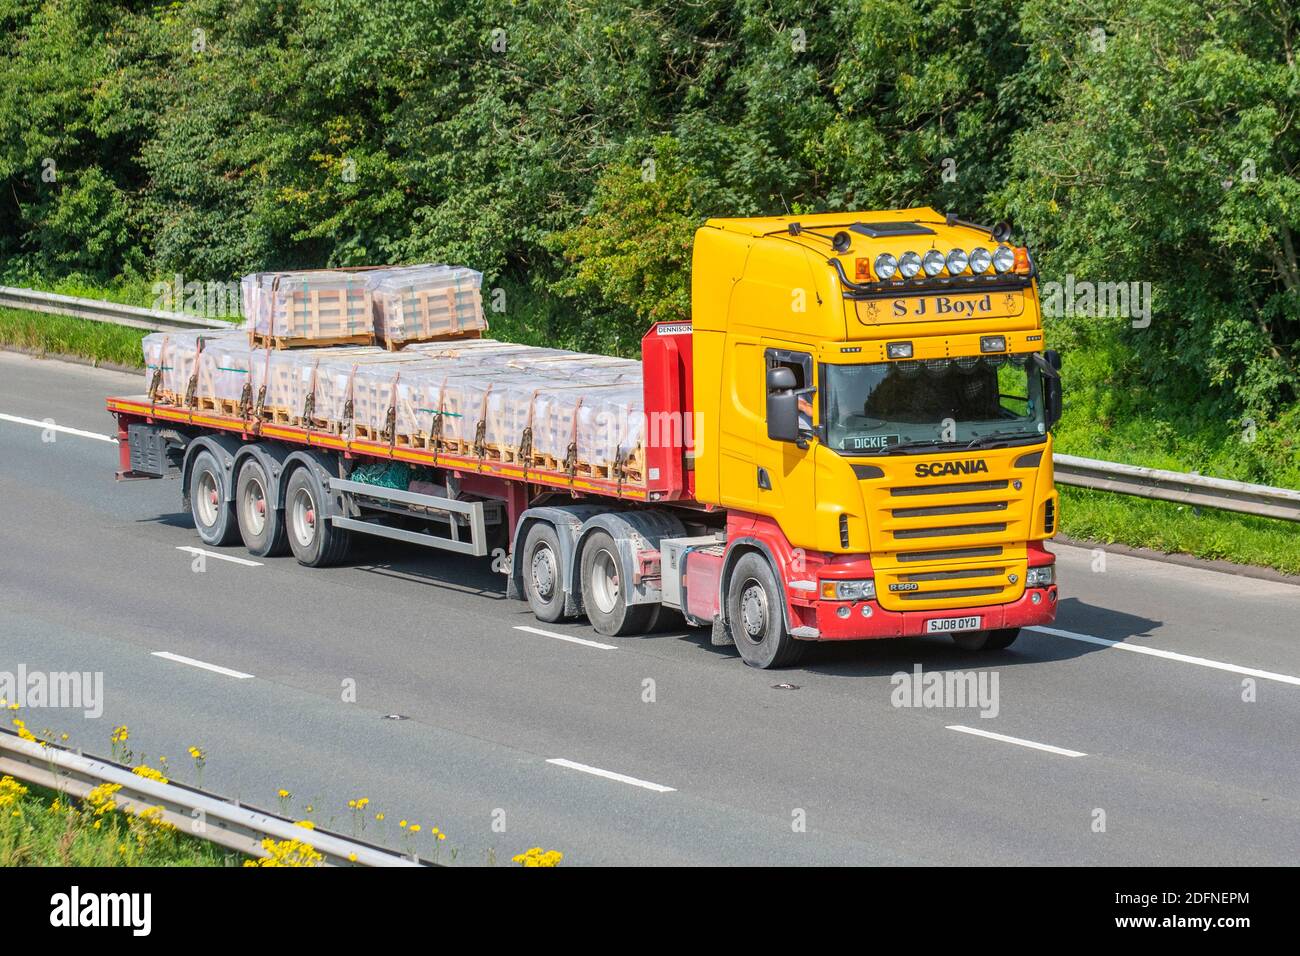 Dickie Driving S J Boyd Haulage Delivery Trucks Lorry Heavy Duty Vehicles Transportation Truck Cargo Carrier Scania R560 Vehicle European Commercial Transport Industry Hgv M6 At Manchester Uk Stock Photo Alamy